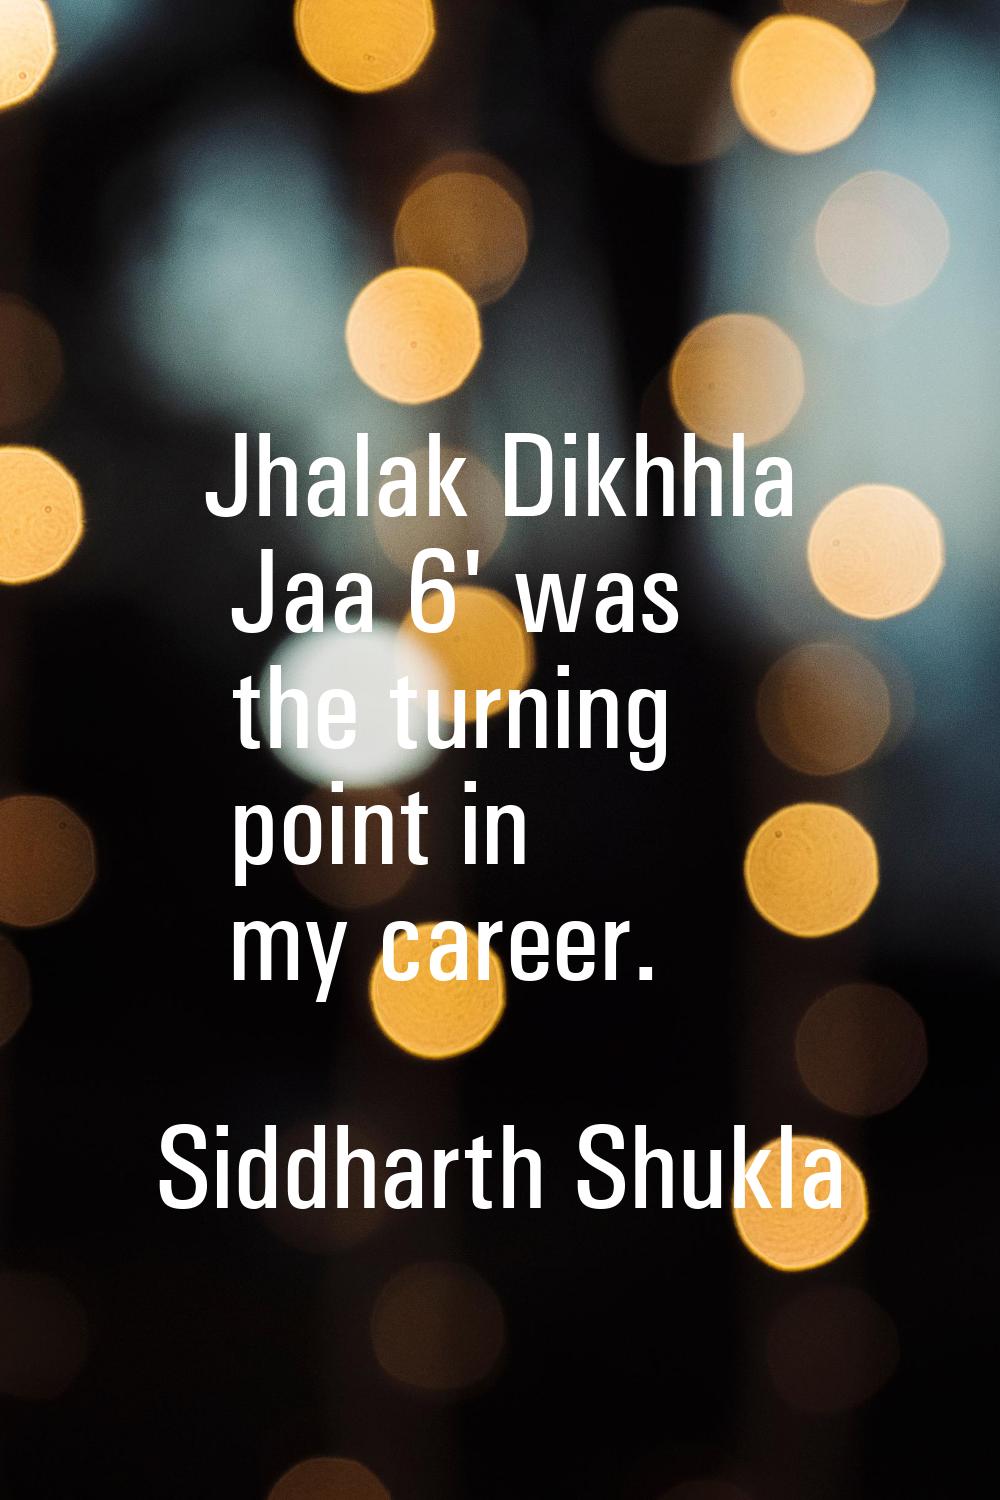 Jhalak Dikhhla Jaa 6' was the turning point in my career.